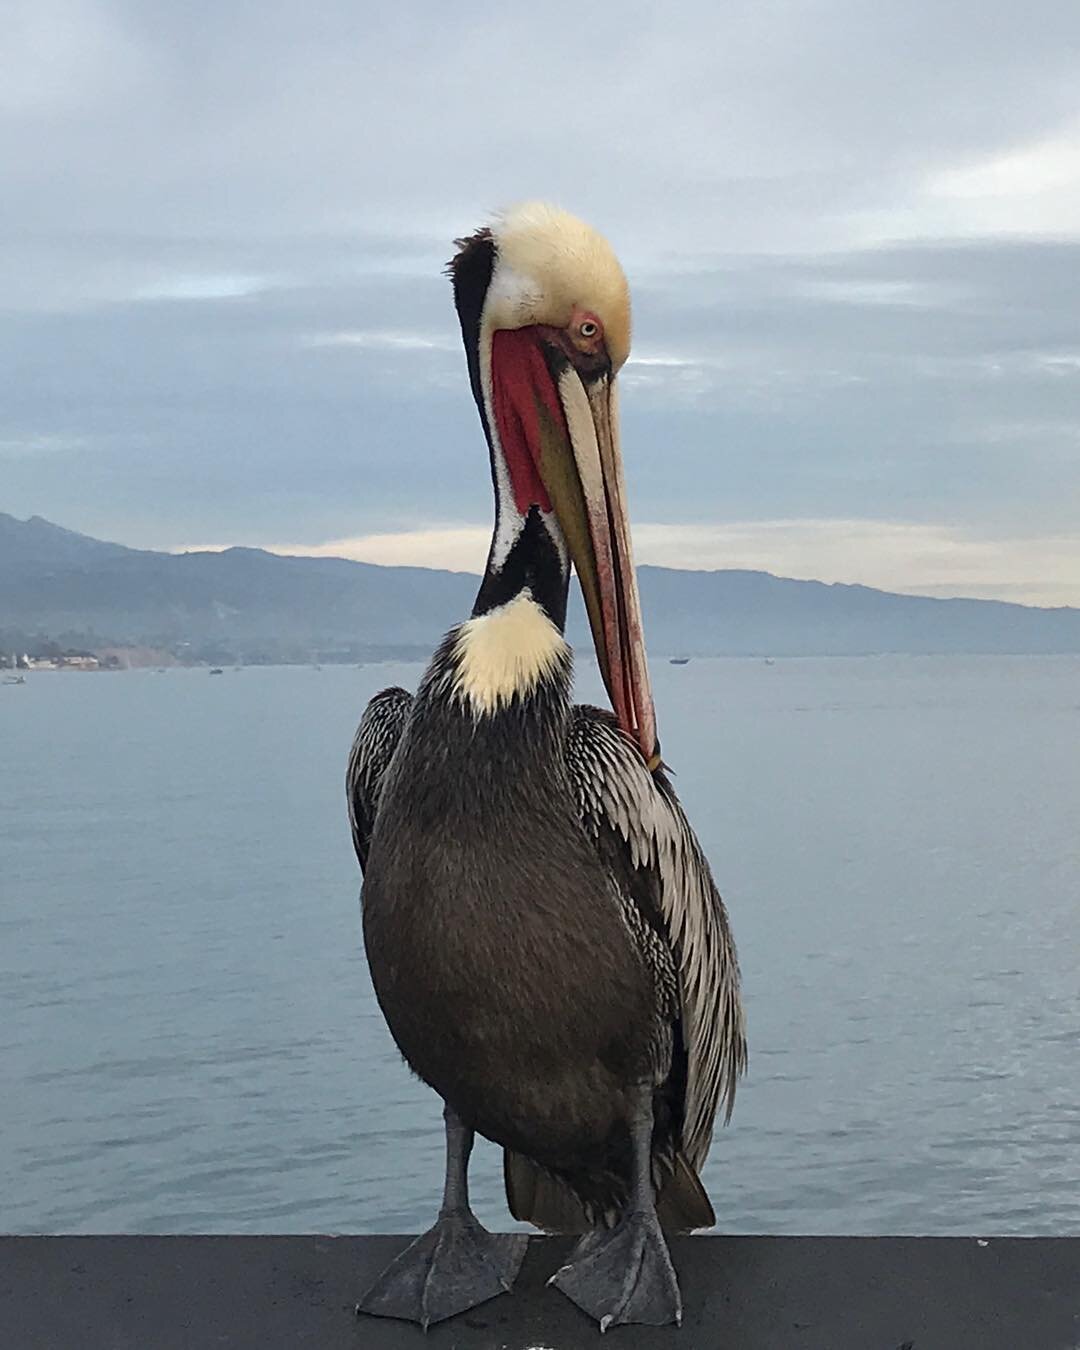 Did you know that the only breeding colonies of California brown pelicans in the western US are on West Anacapa and Santa Barbara Islands?
. 
That they can live up to 40 years old and that once the birds mate, they stay together for years if not for 